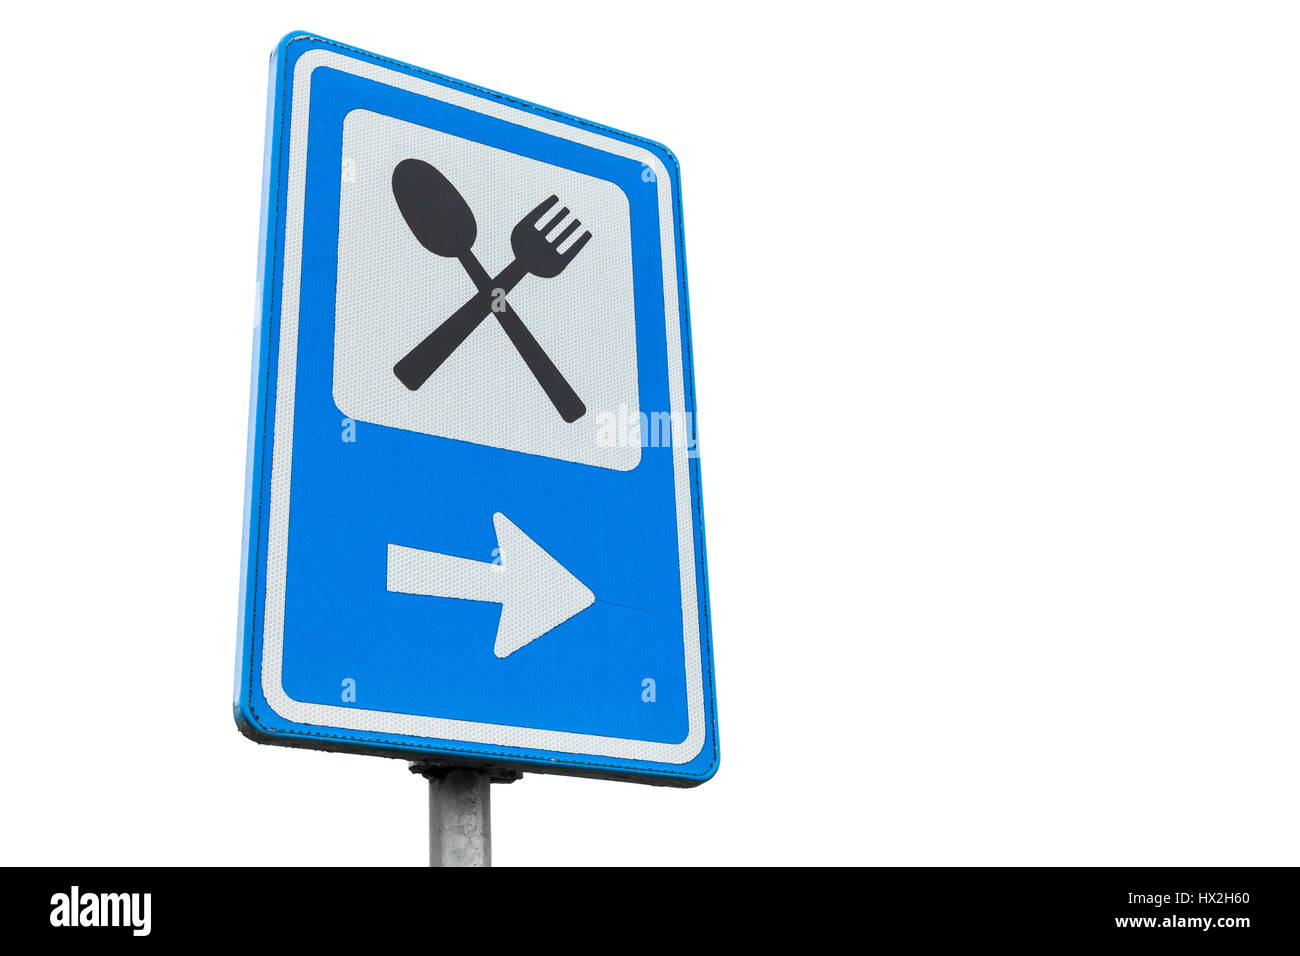 Dinning service road sign isolated on white background, close up photo Stock Photo